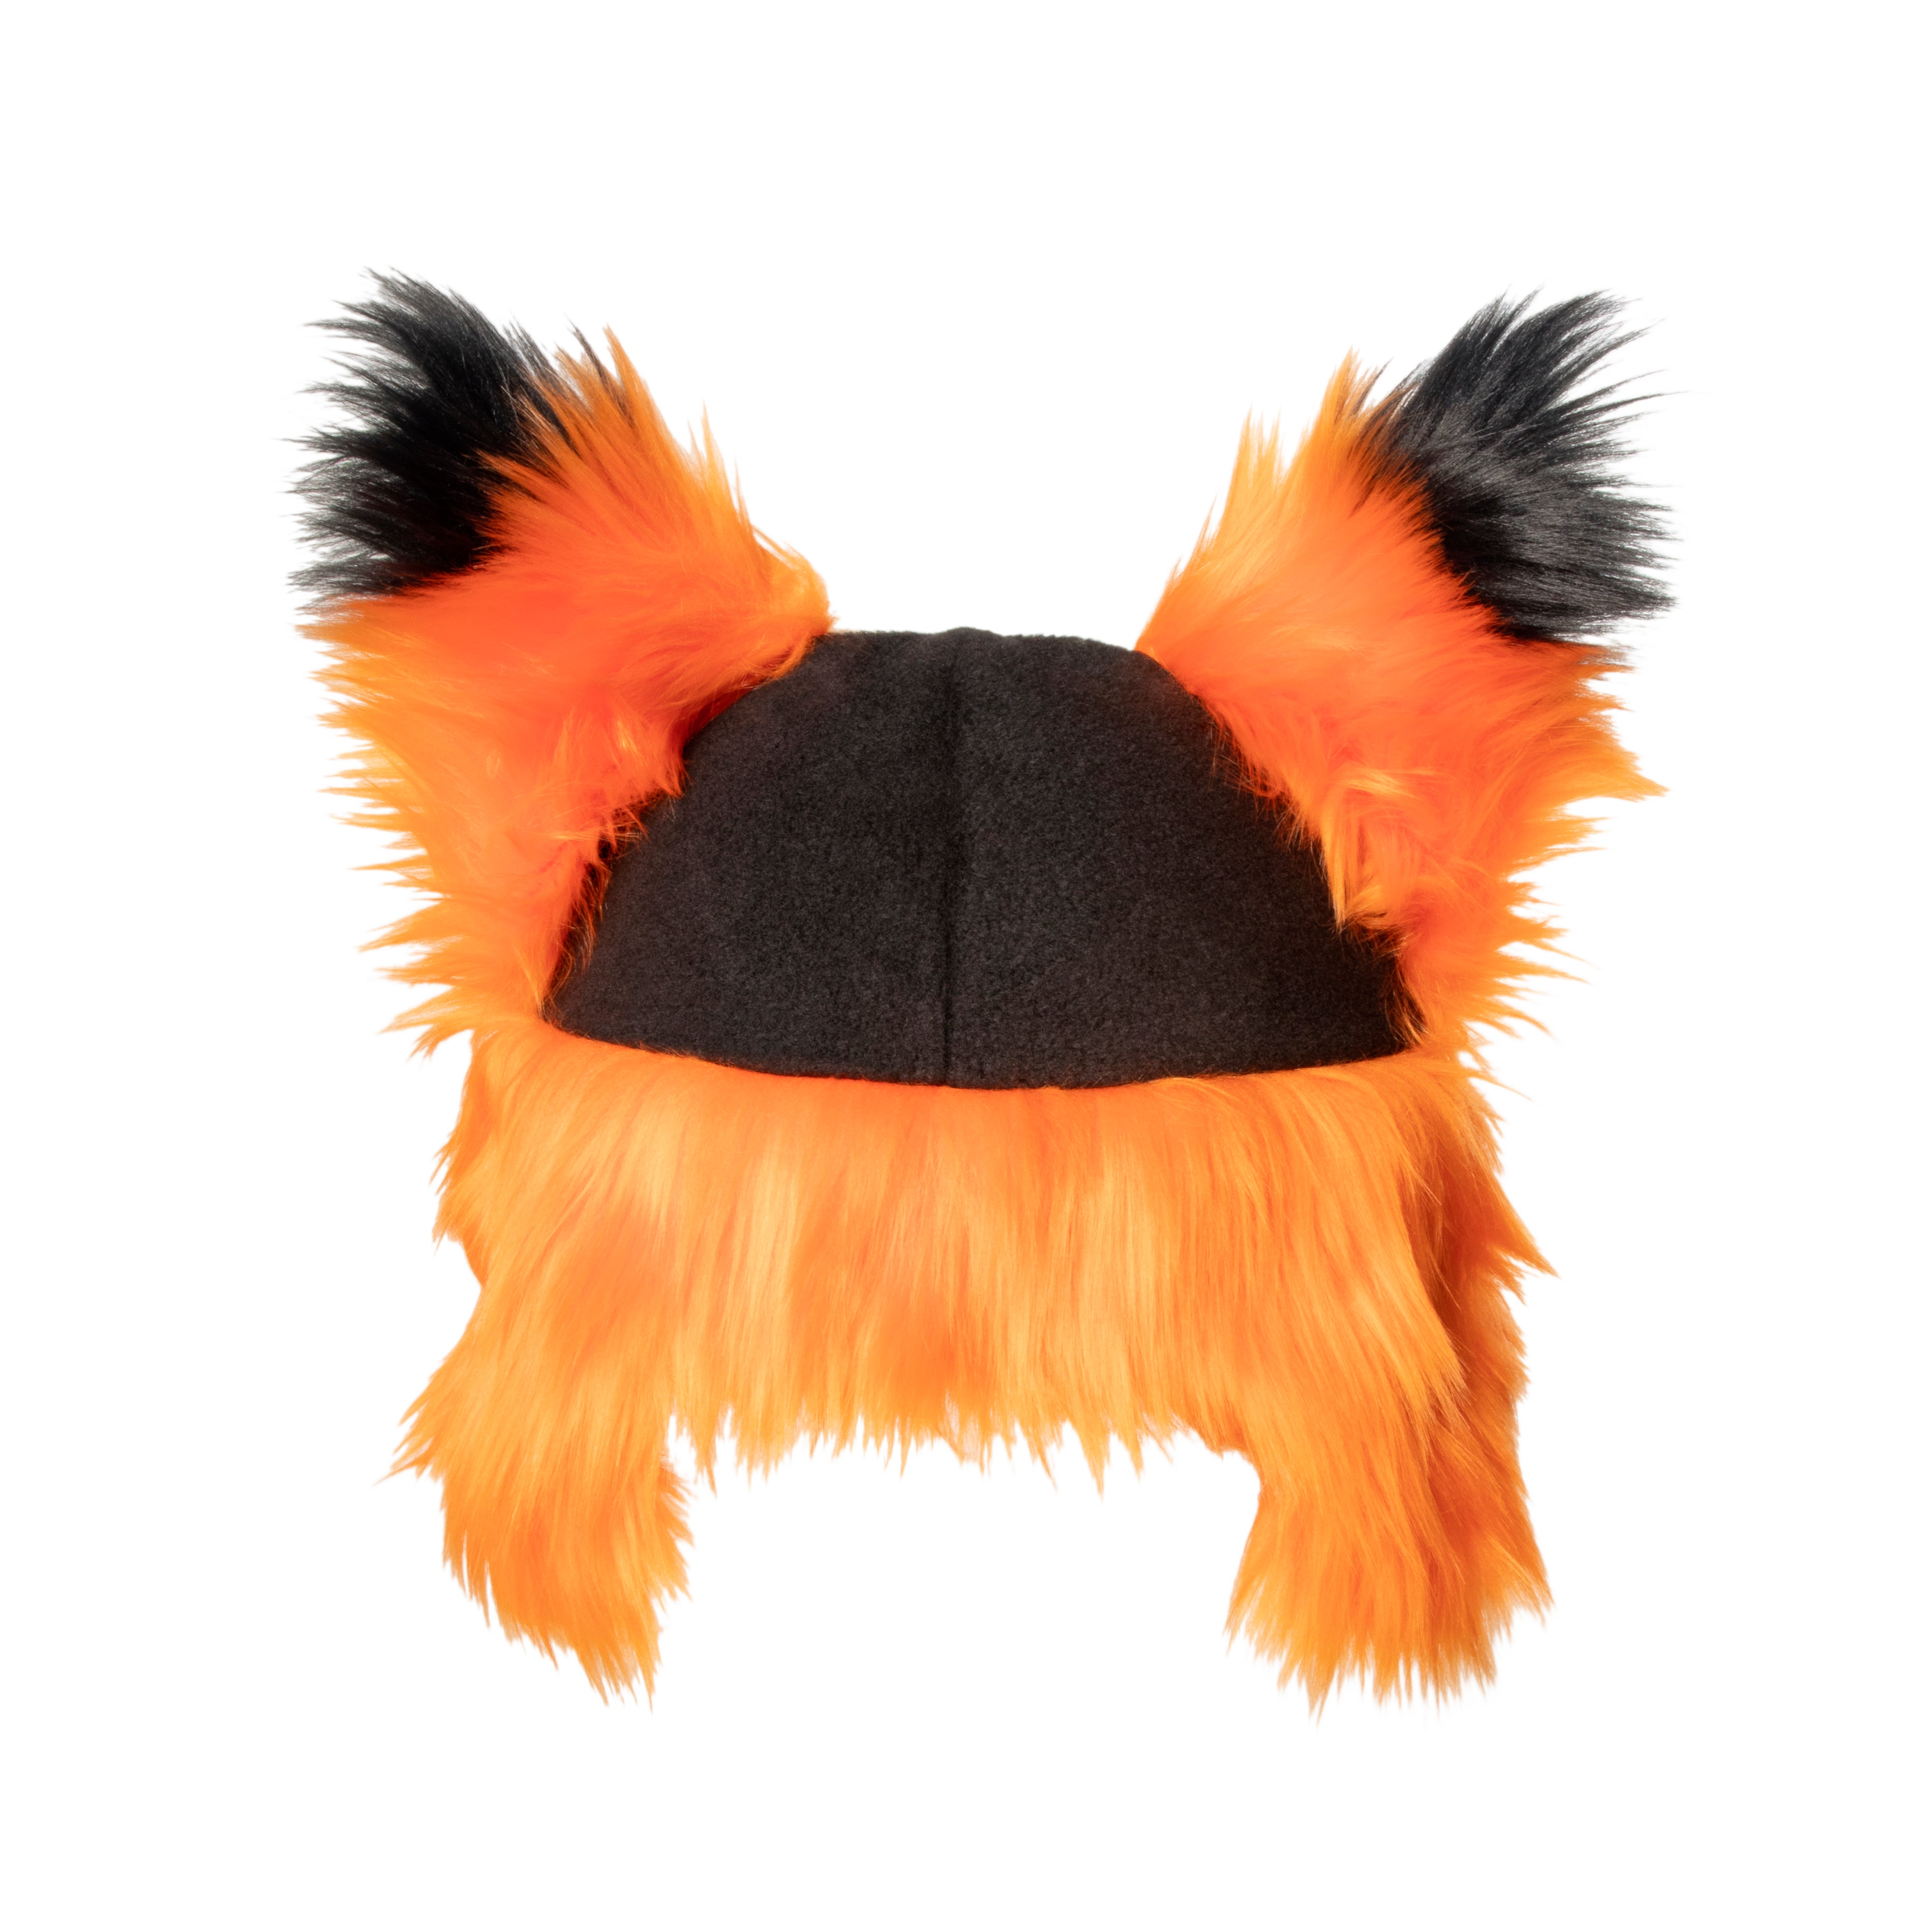 orange Pawstar faux fur fox yip hat. Great for halloween costume and furry cosplay.